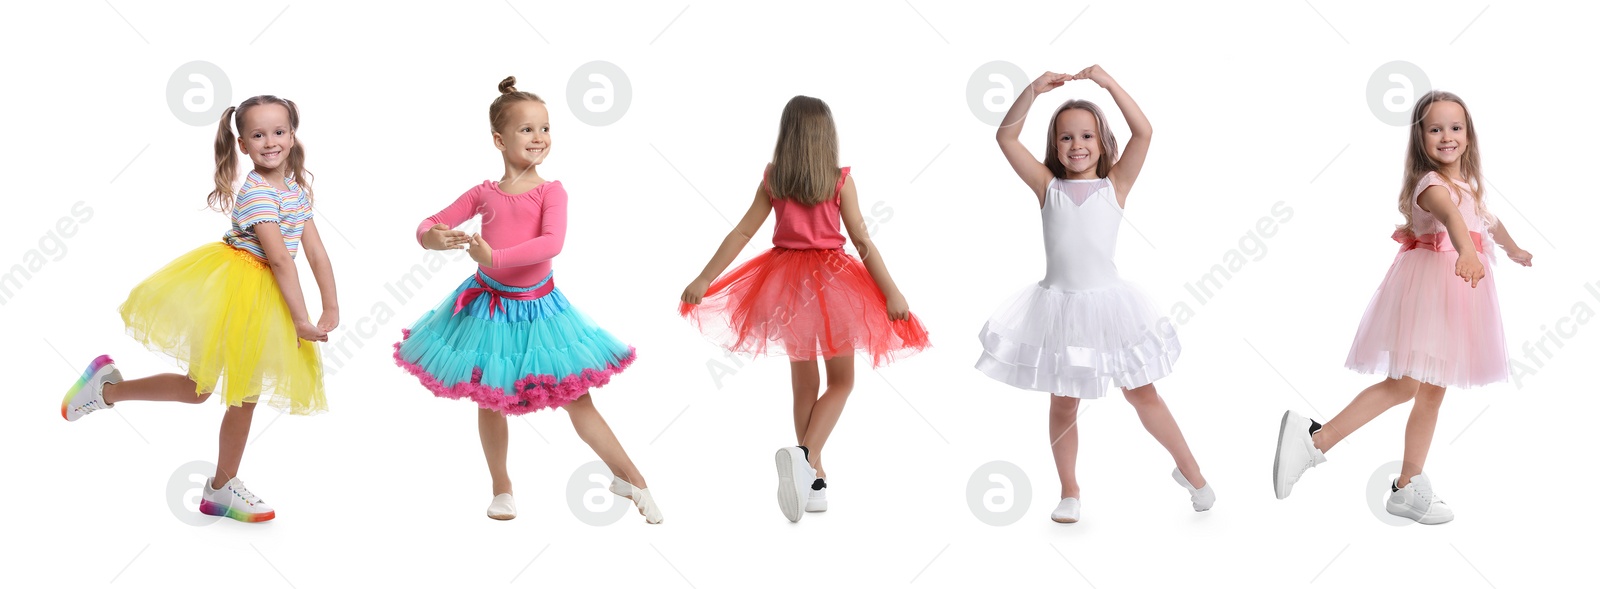 Image of Cute little girls dancing on white background, set of photos